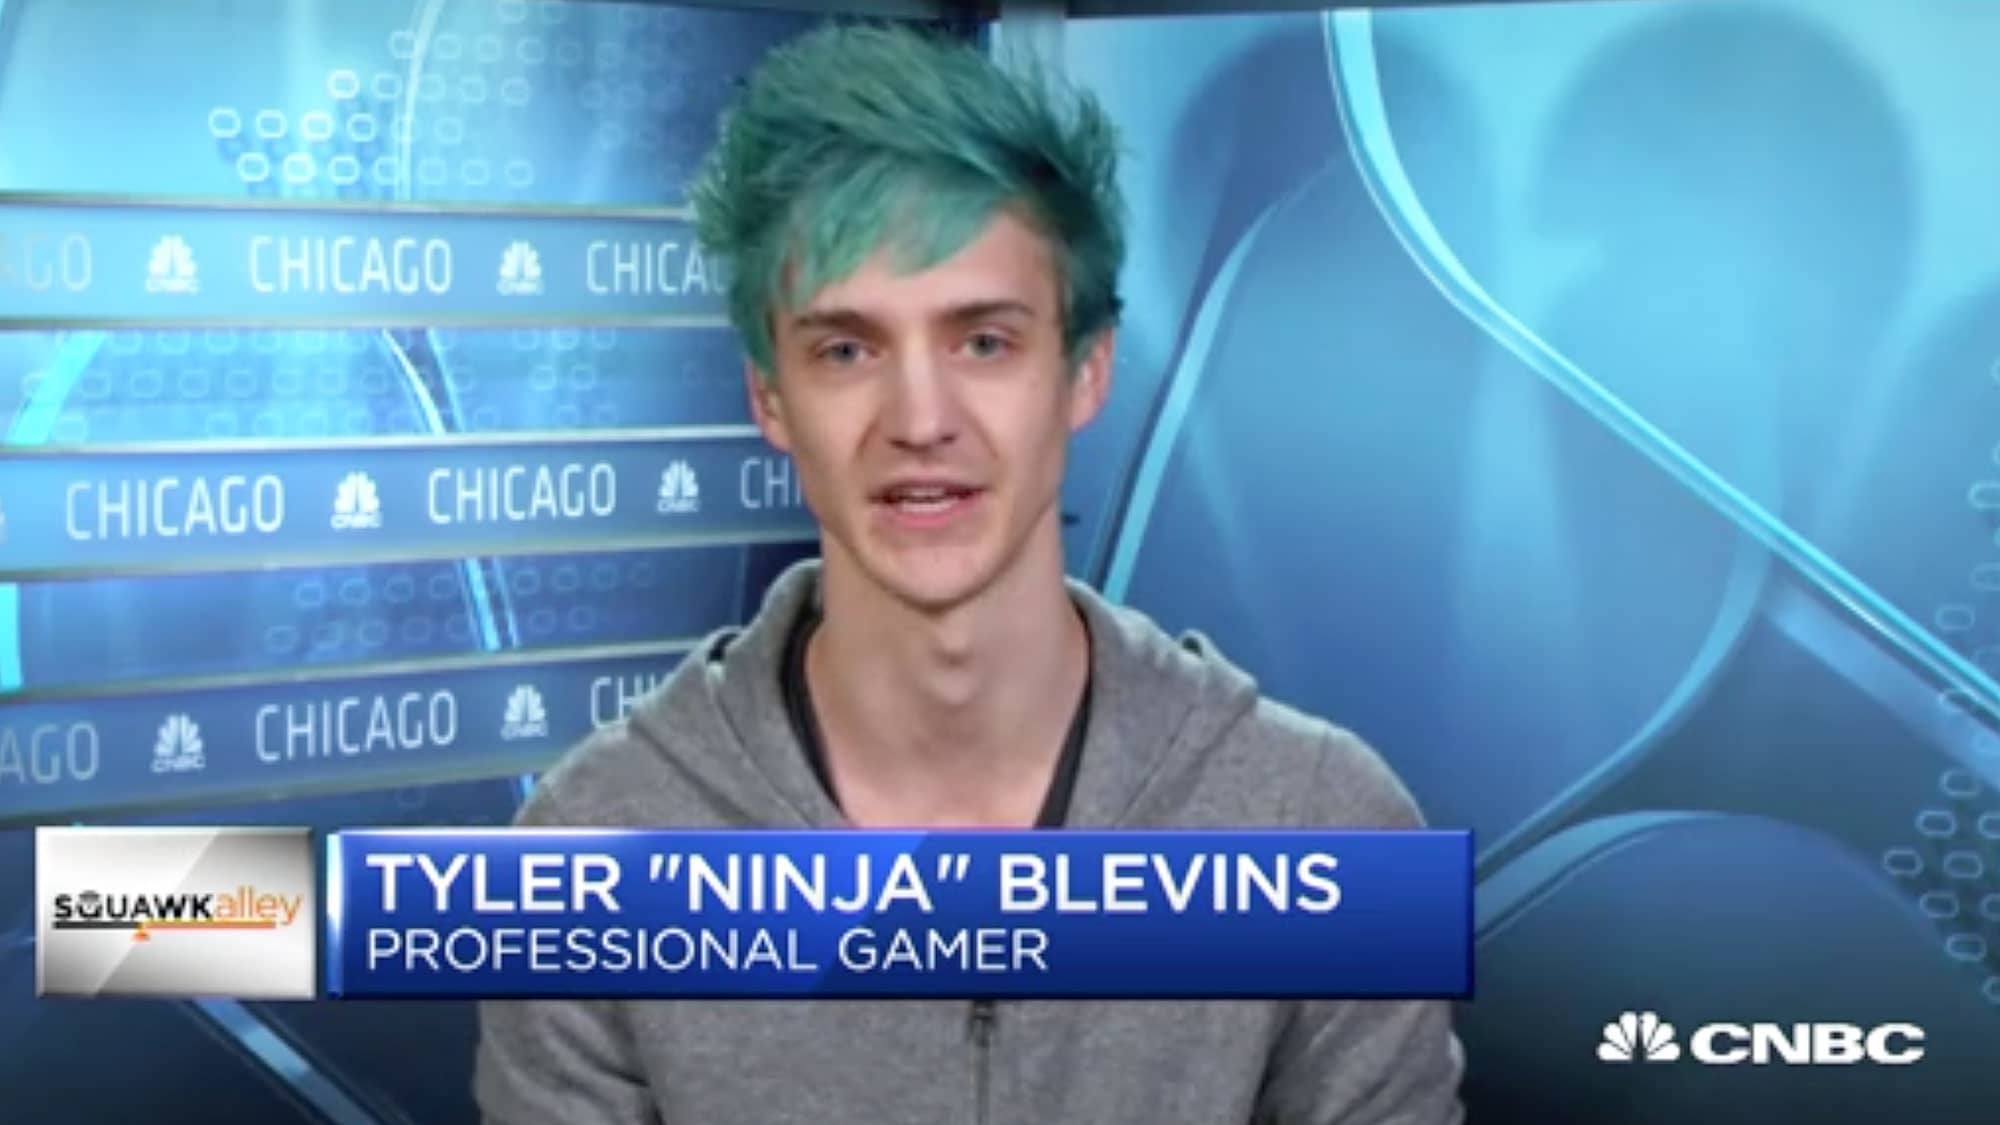 tyler ninja blevins explains how he makes more than 500 000 a month playing video game fortnite - fortnite sponsor a creator